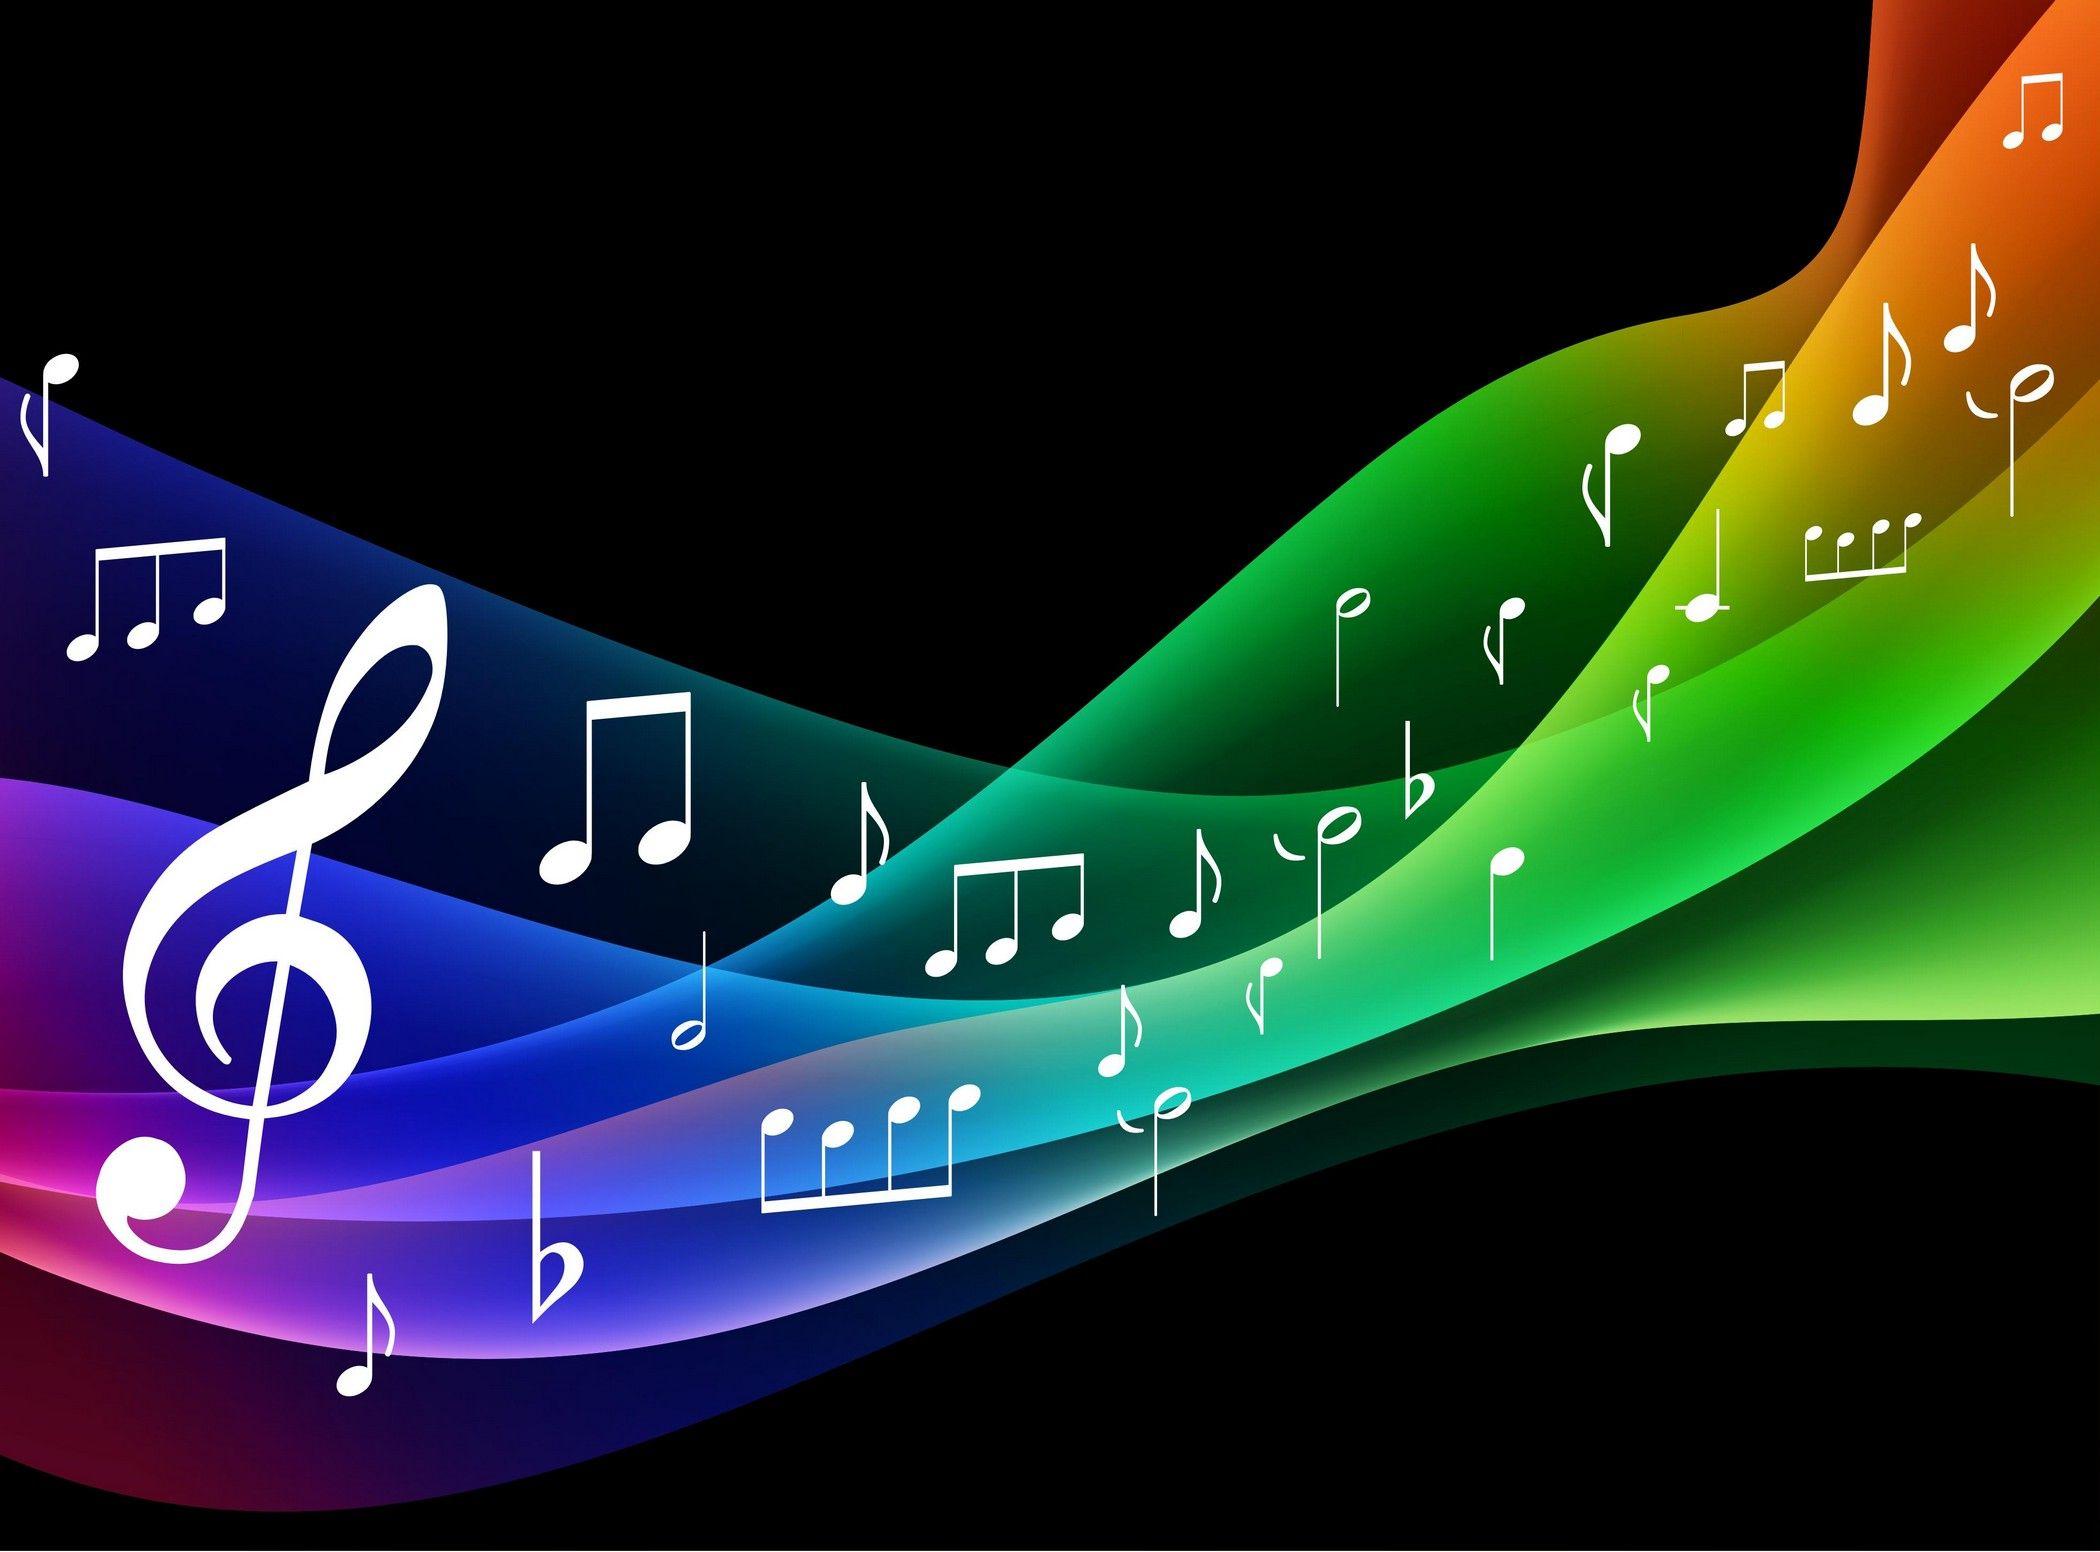 Musical Backgrounds Image - Wallpaper Cave